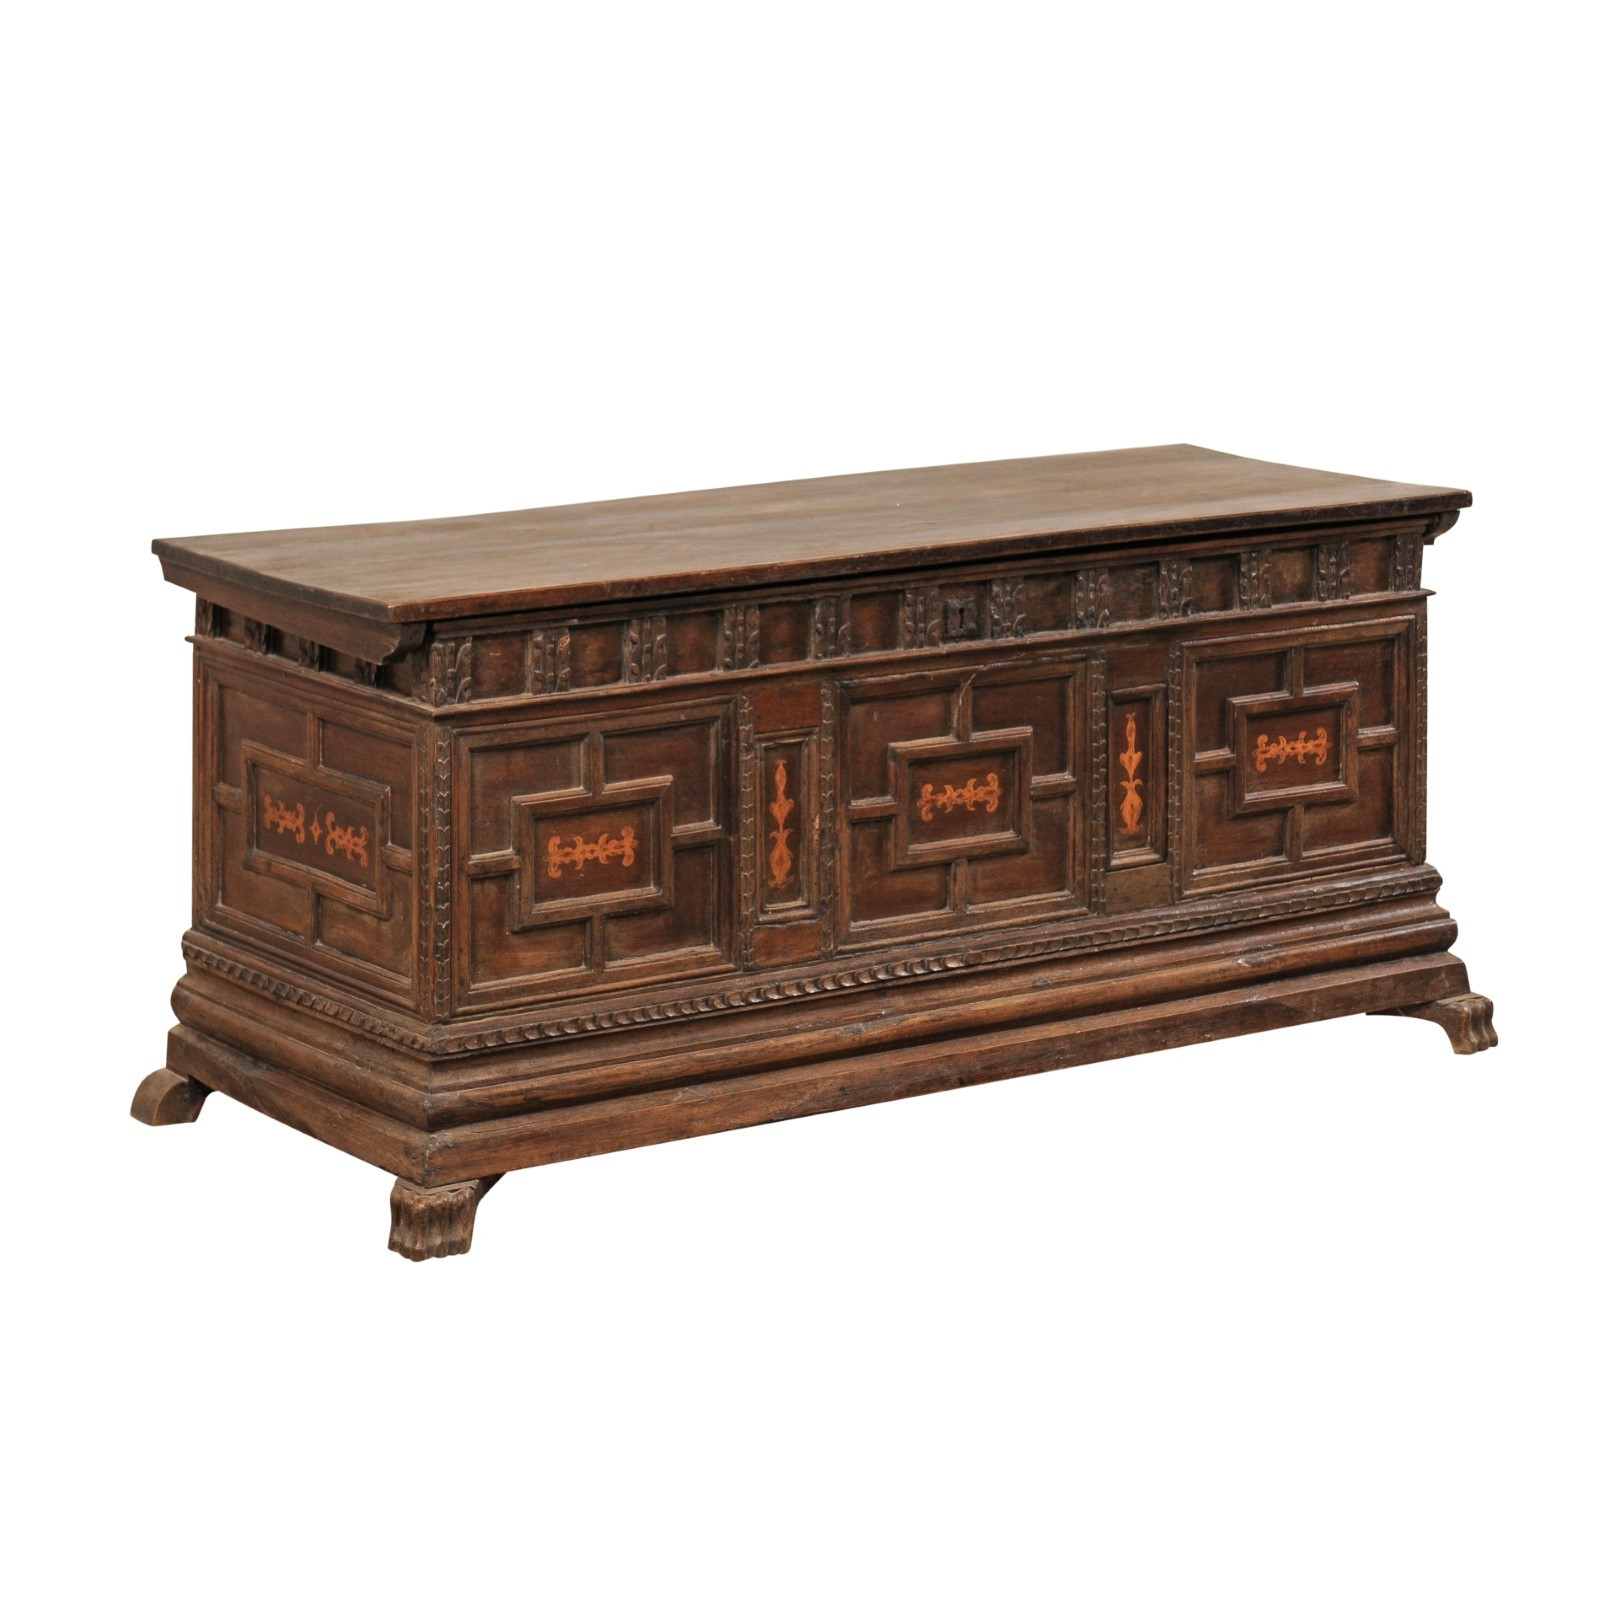 18th C. Spanish Carved-Wood Coffer